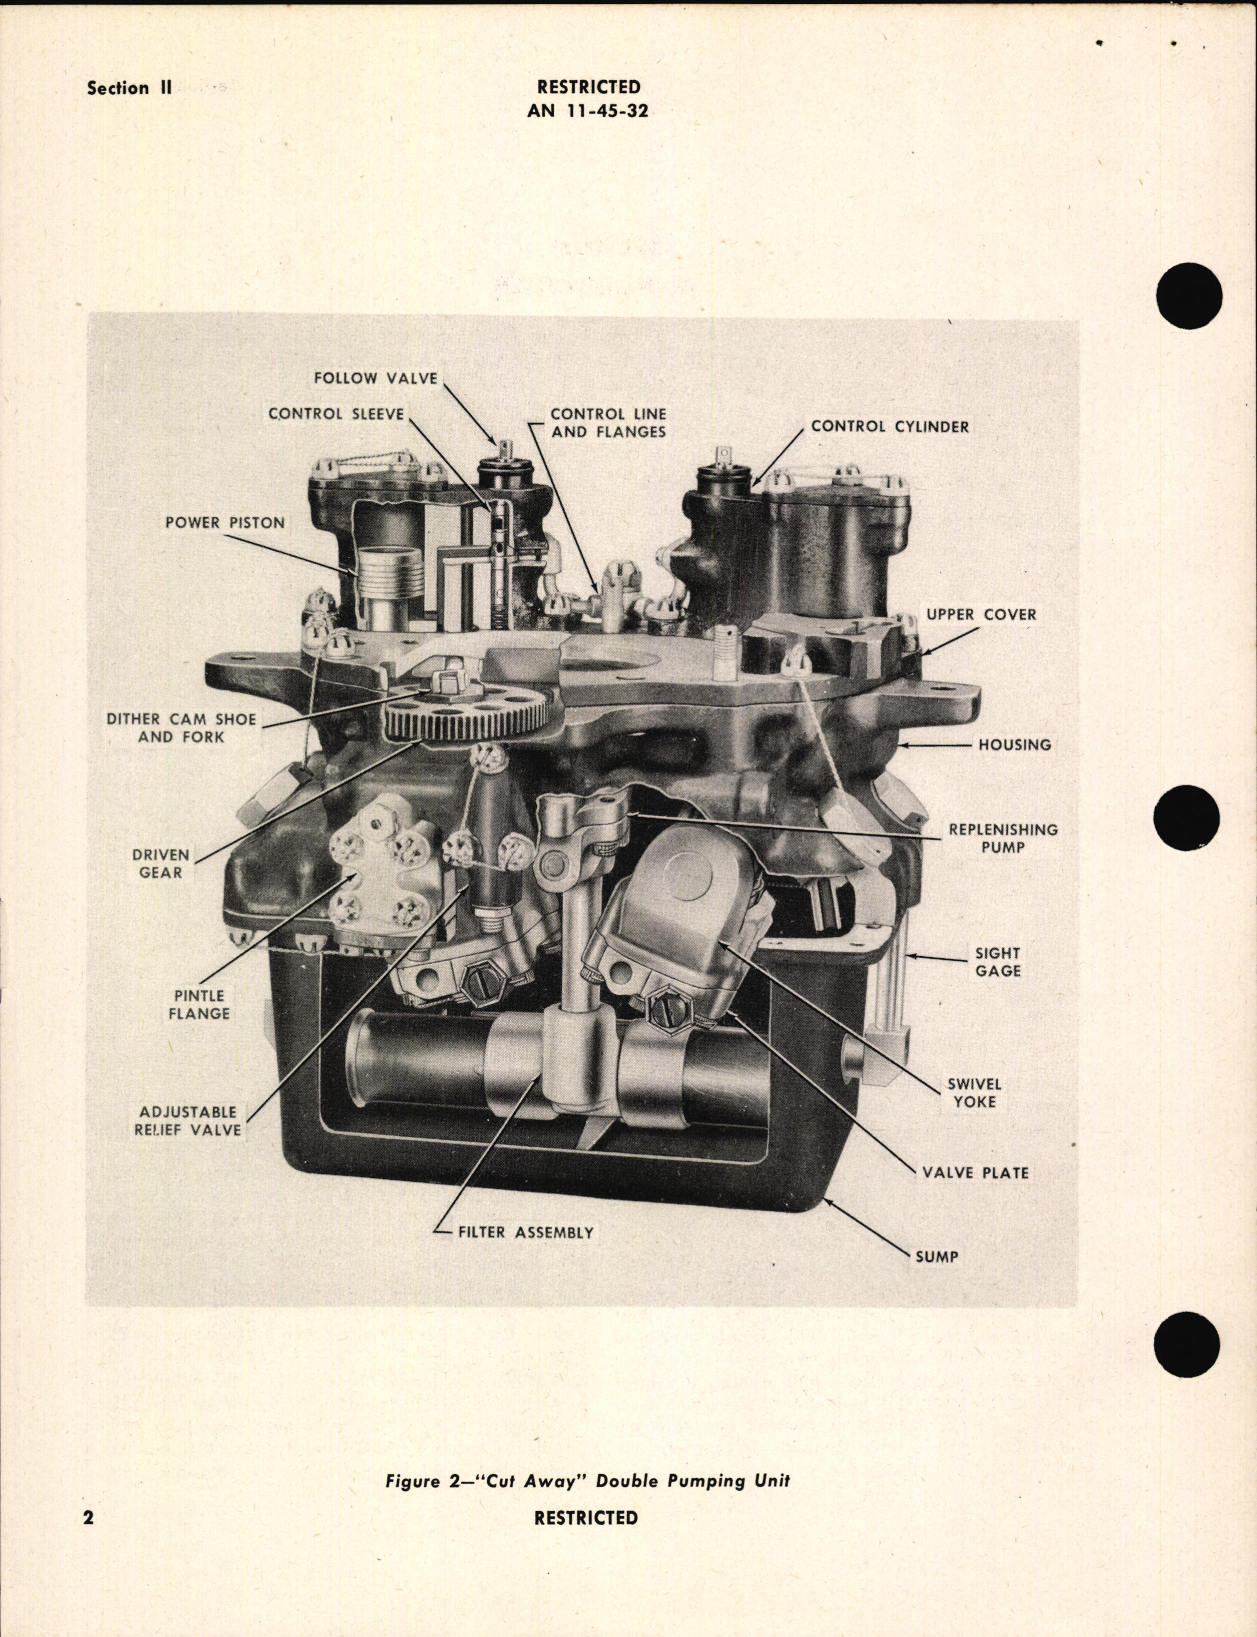 Sample page 6 from AirCorps Library document: Handbook of Instructions with Parts Catalog for Turret Power Unit Model AA-16850